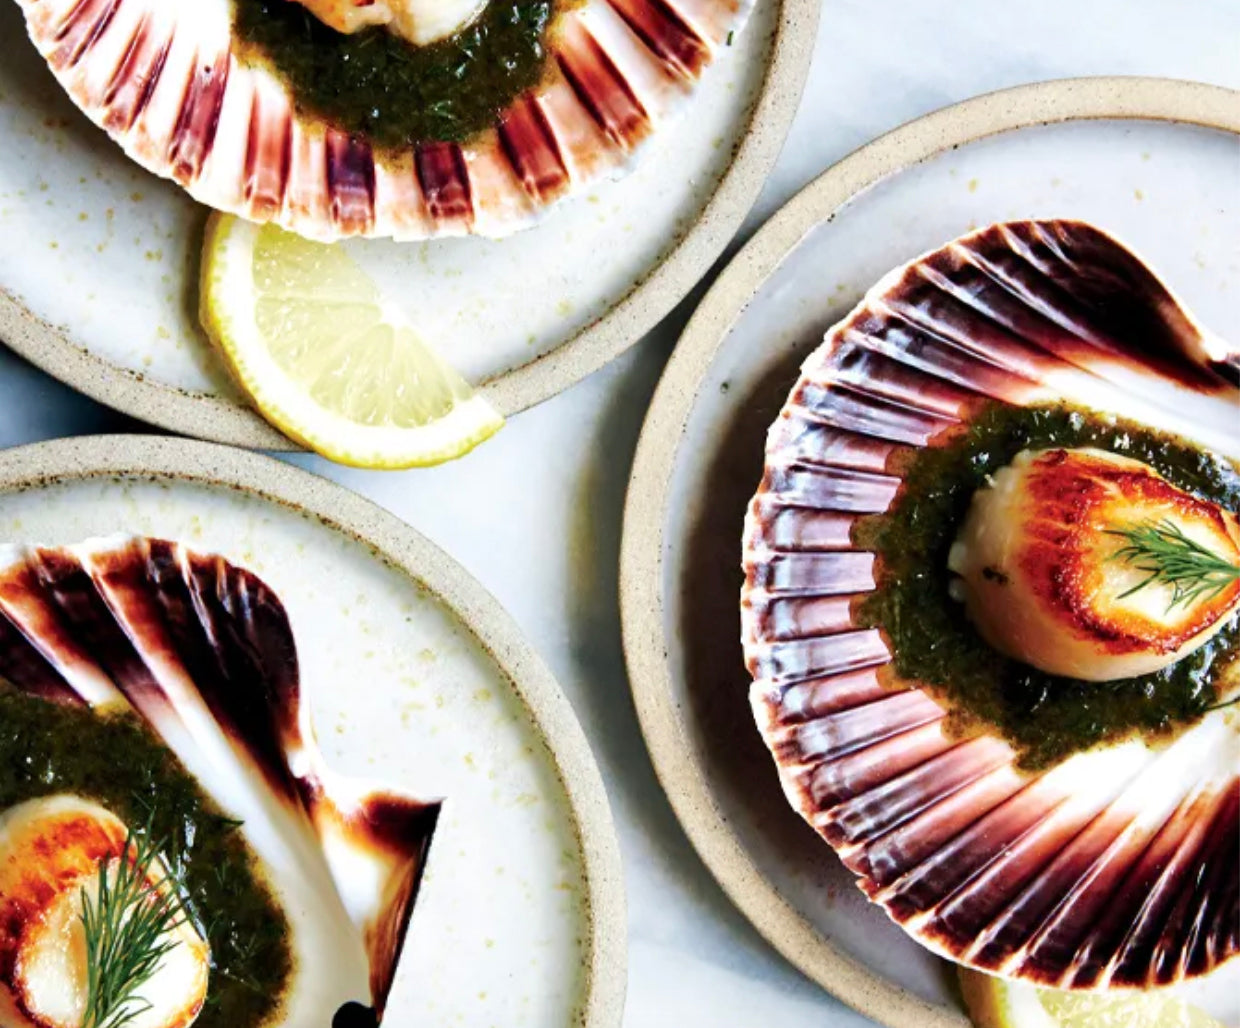 Scallops with Nori Brown Butter and Dill